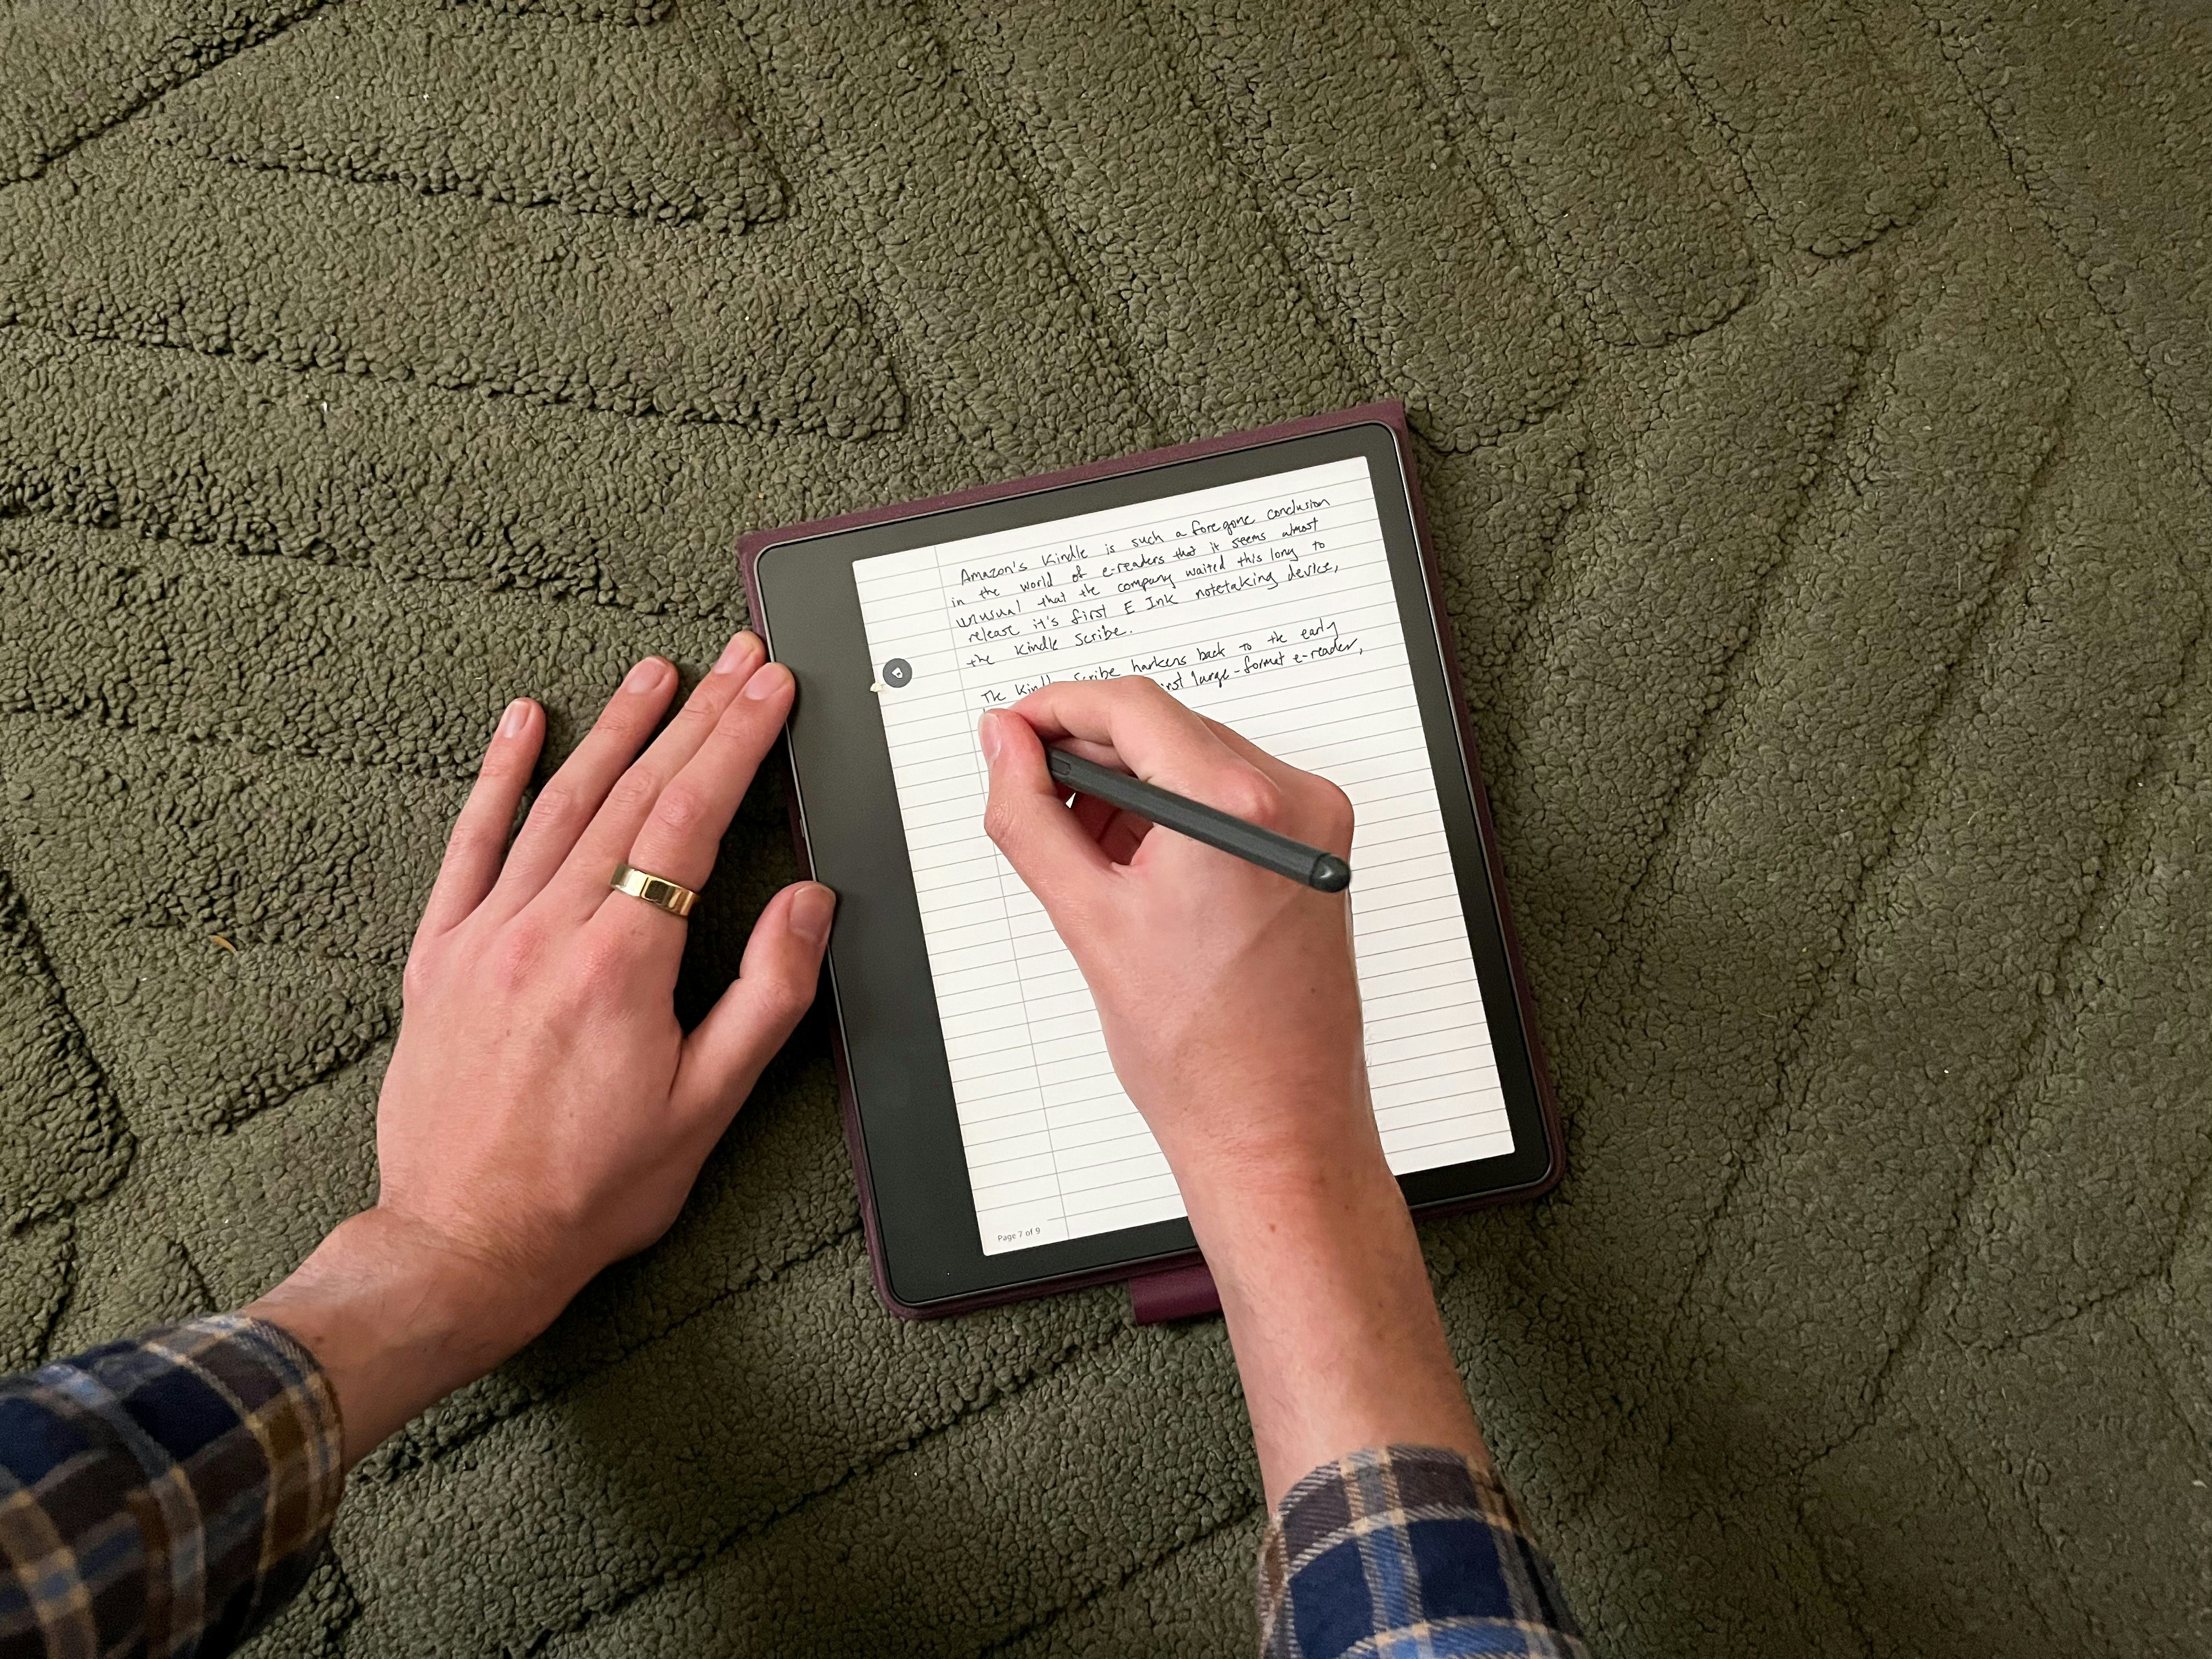 New  Kindle Scribe Updates Make It People's Favorite - Good e-Reader